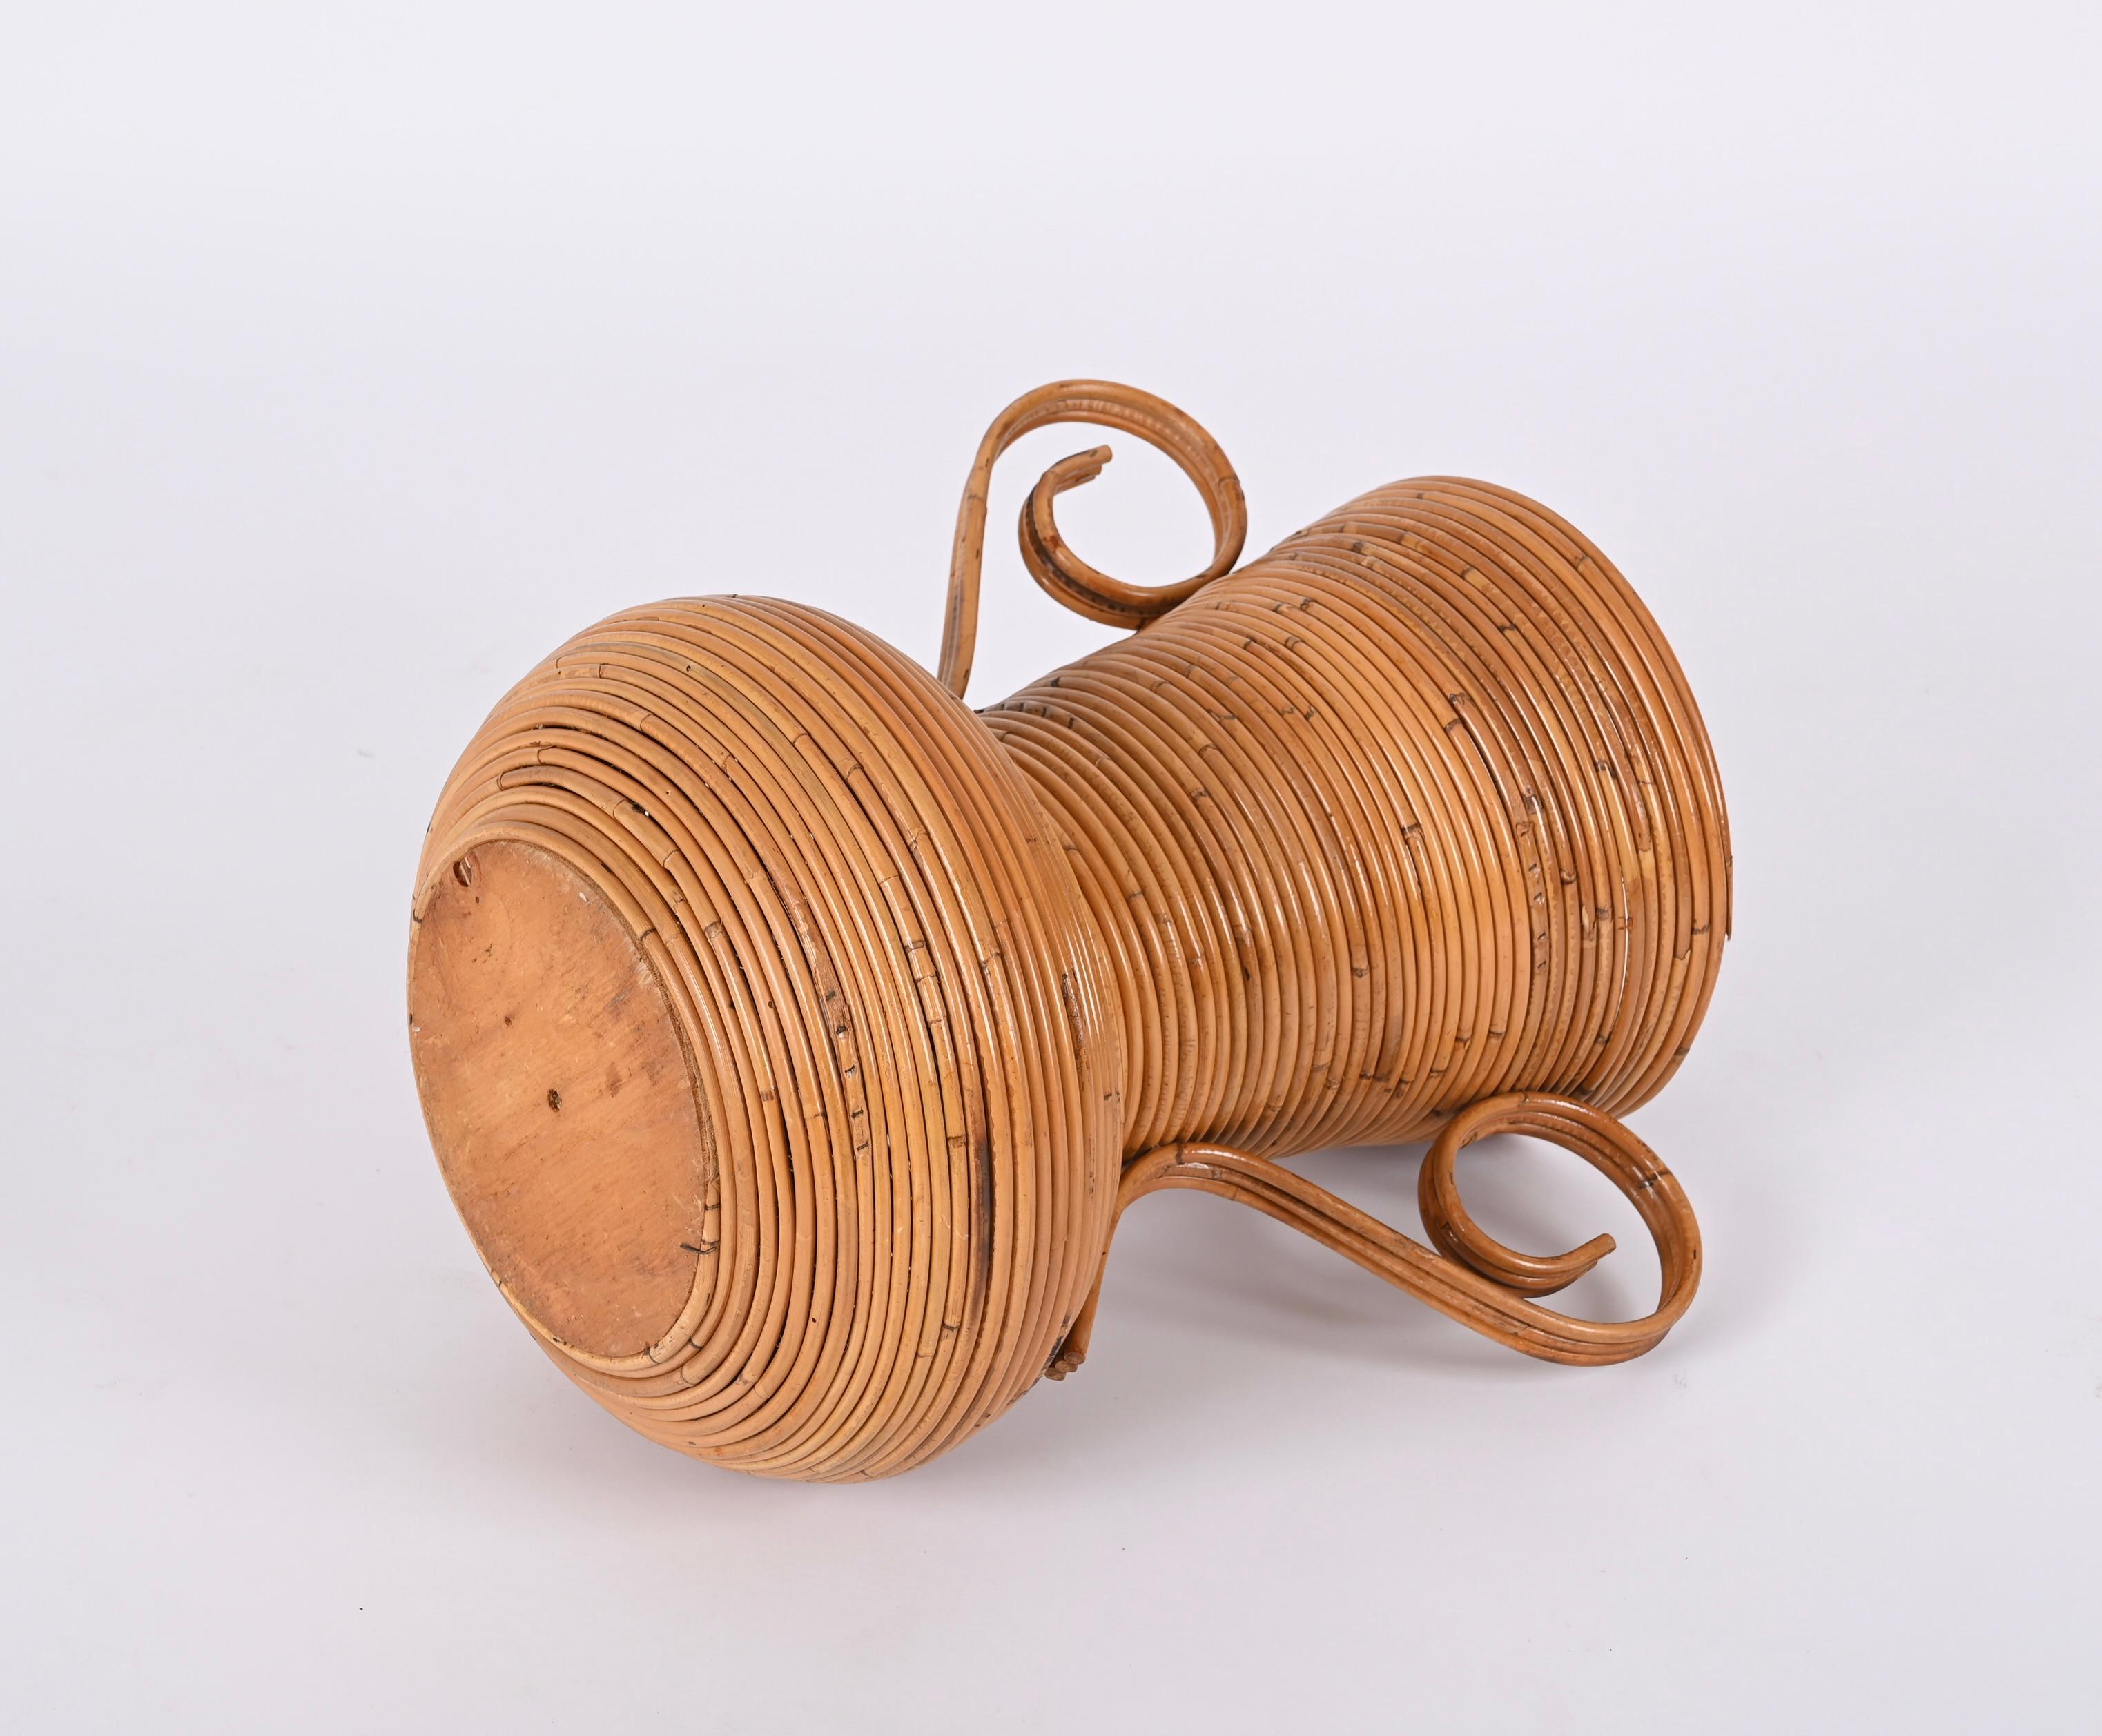 Midcentury Bamboo and Rattan Decorative Vase, by Vivai del Sud, Italy, 1970s For Sale 5